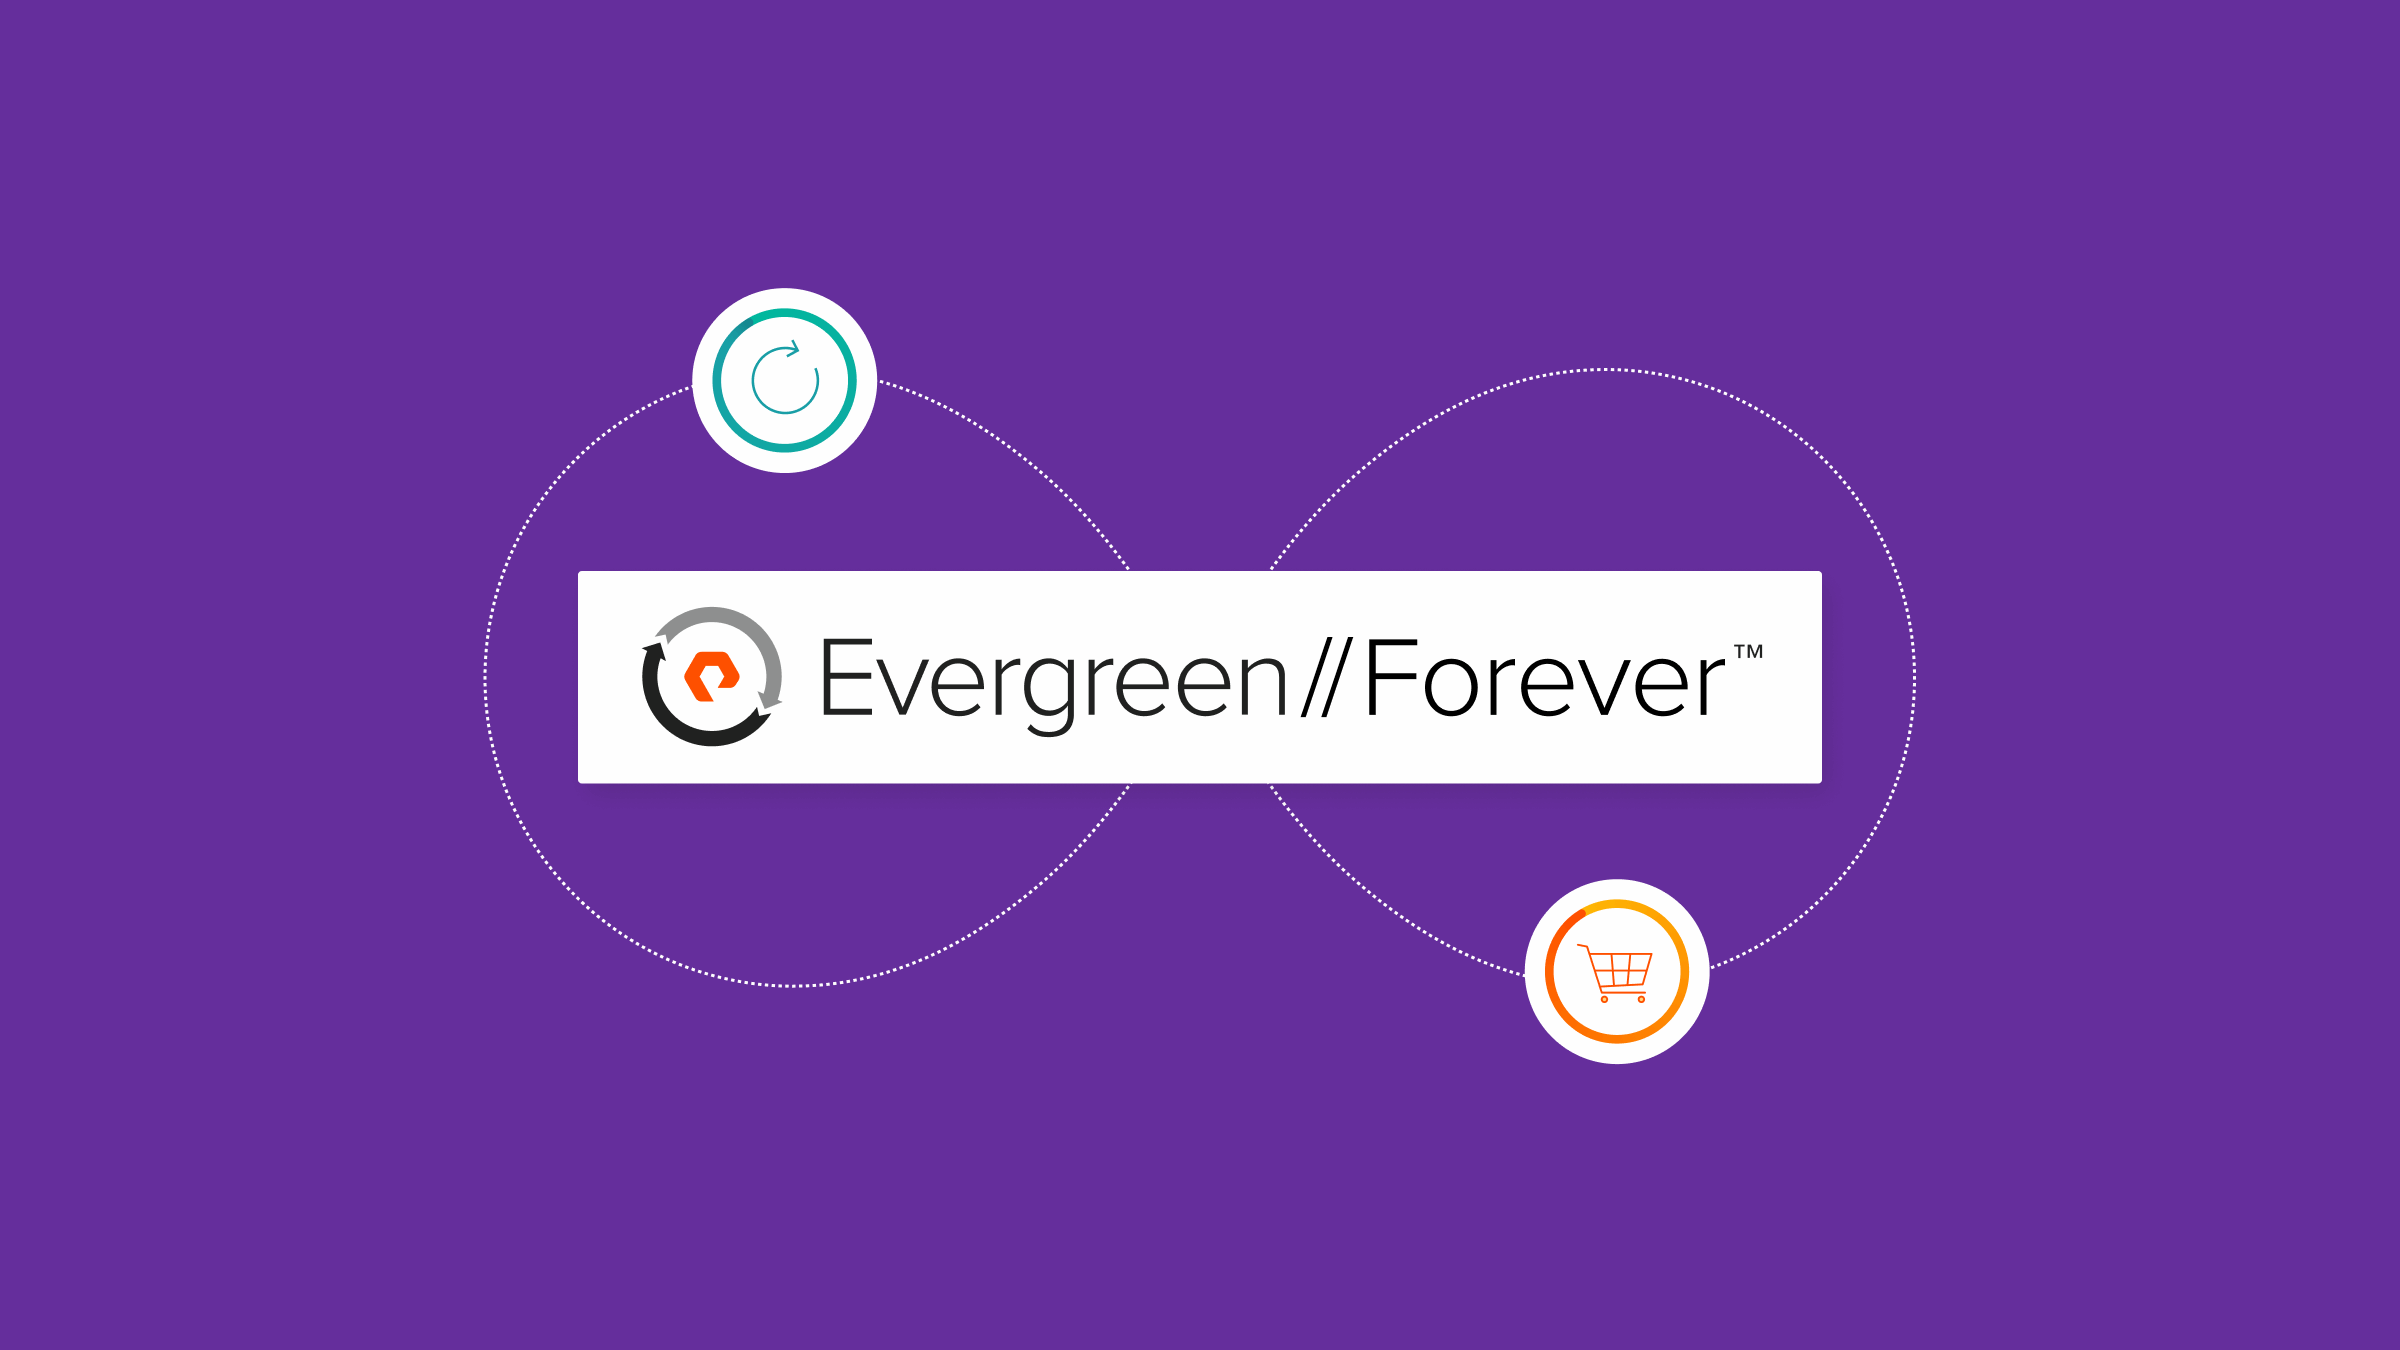 Evergreen//Forever: Your Subscription to Innovation